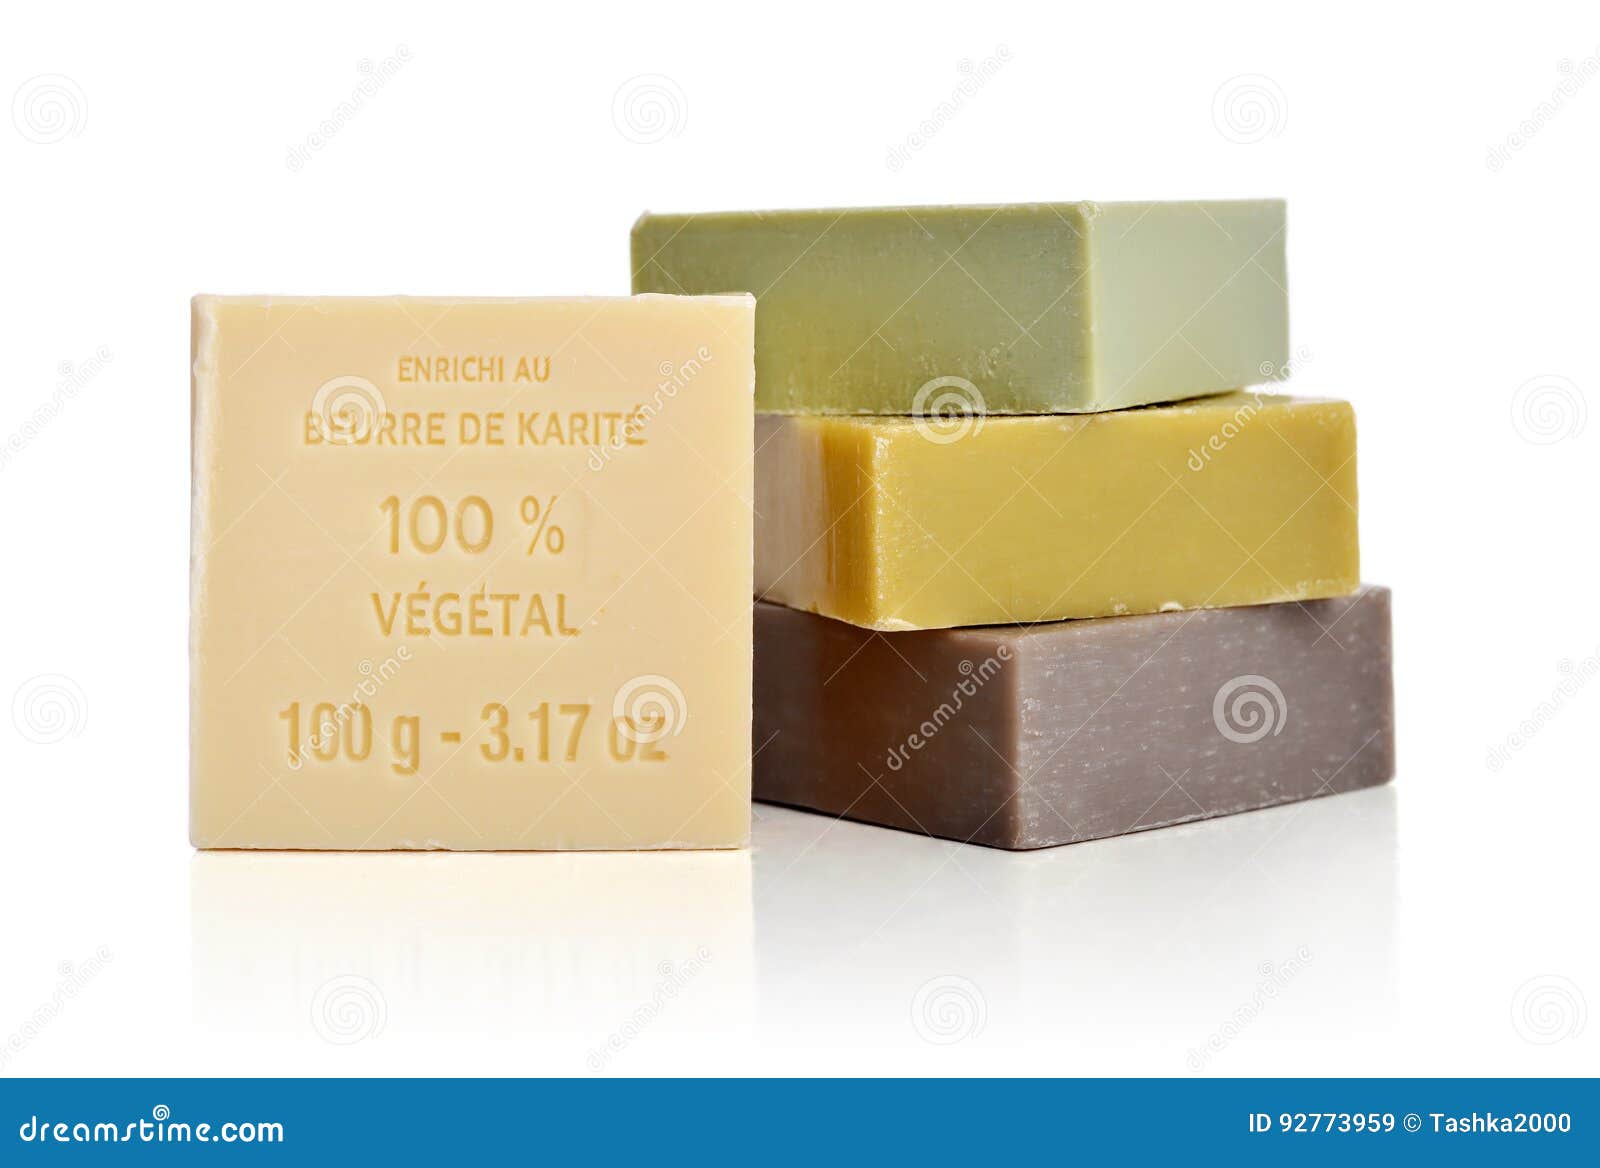 enriched with shea butter 100% vegetal soaps